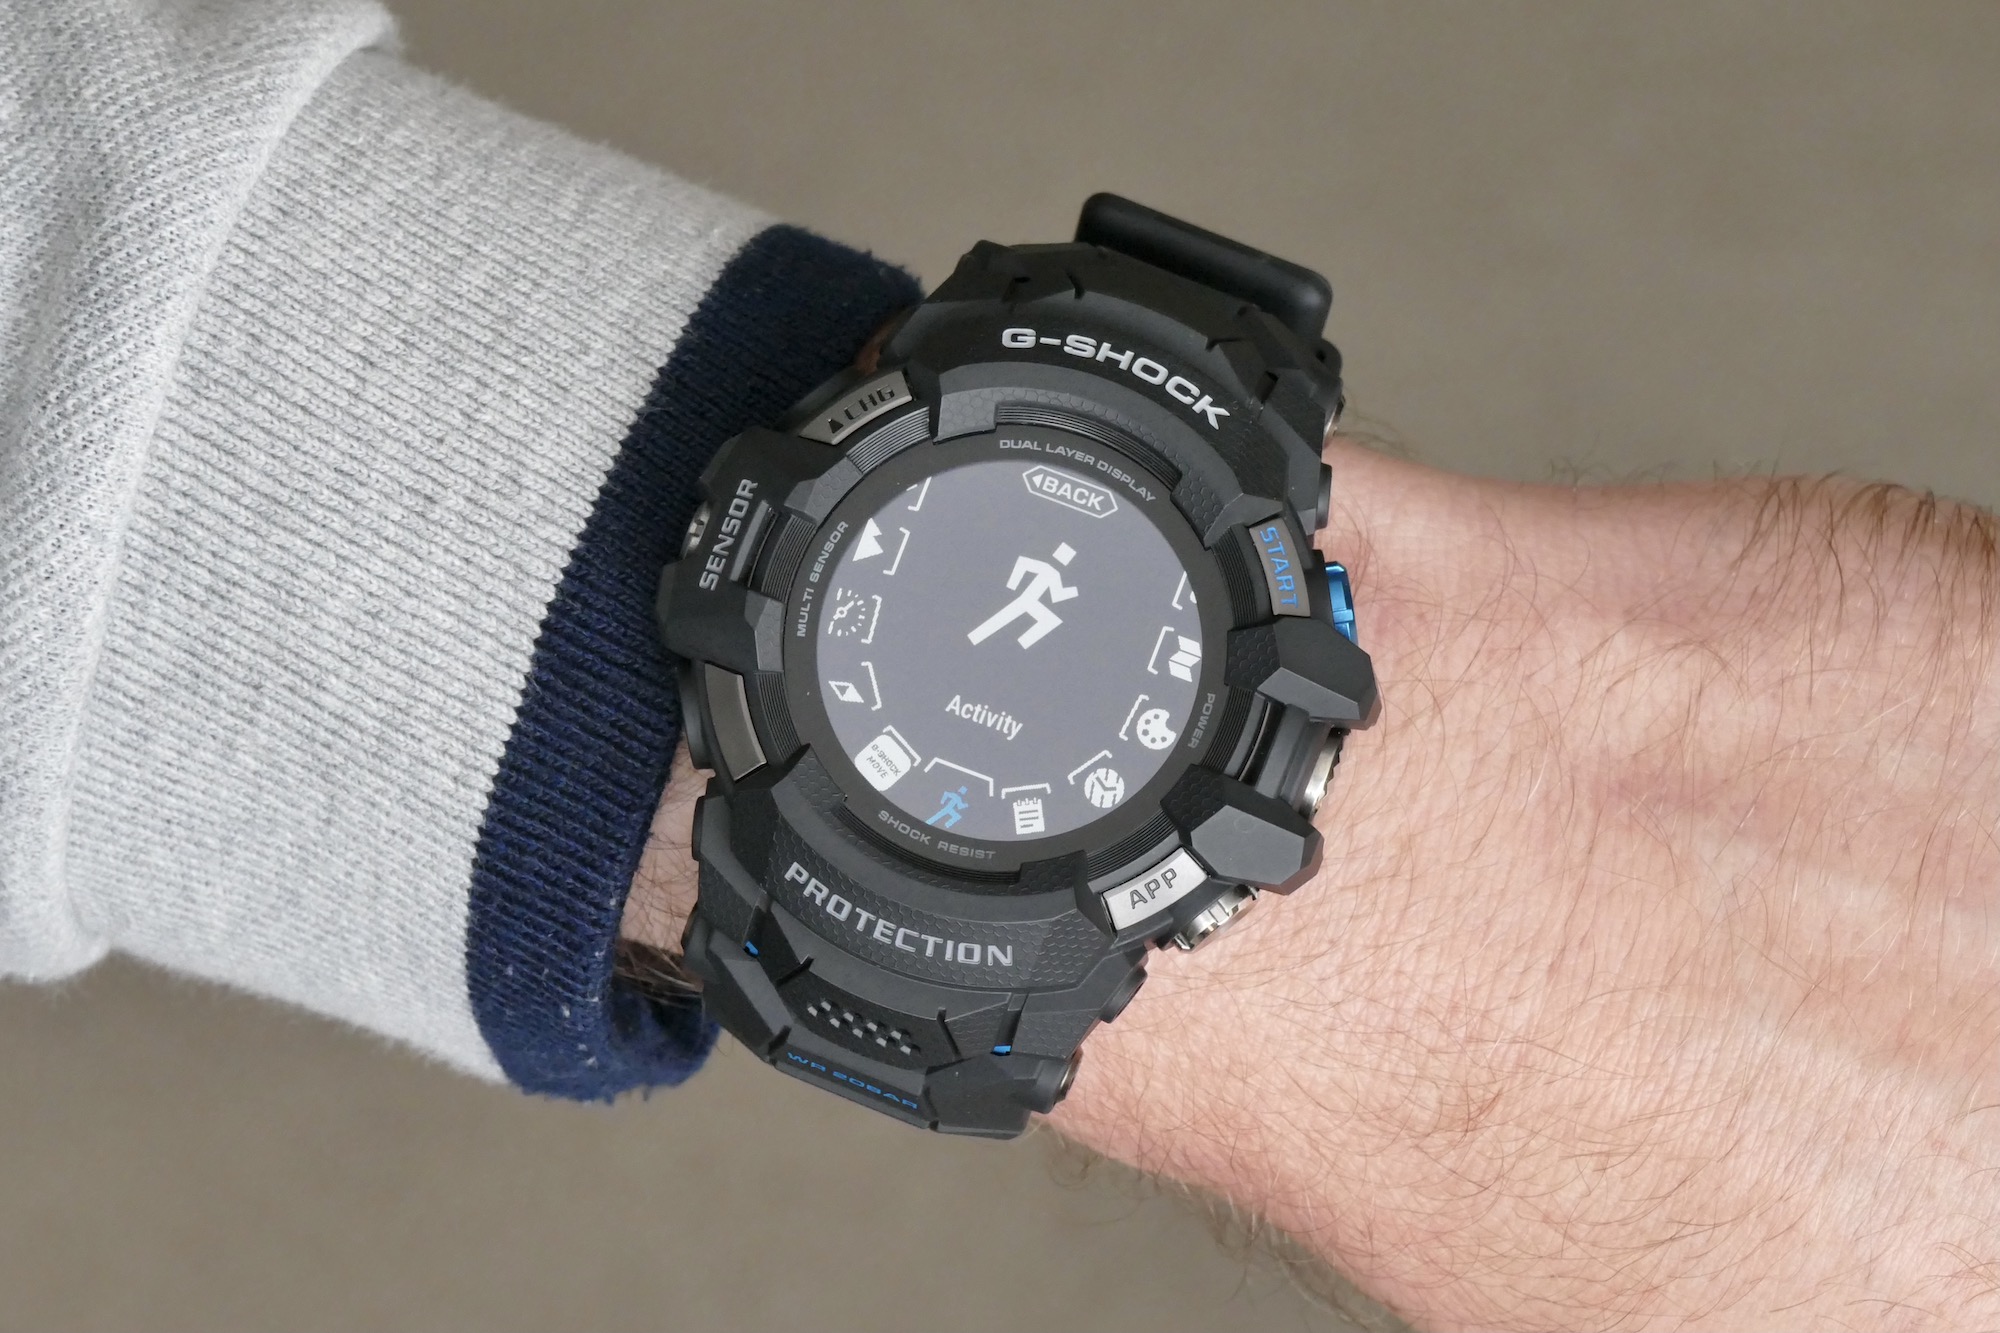 G-Shock GSW-H1000 Review: The G-Shock Collector's Choice